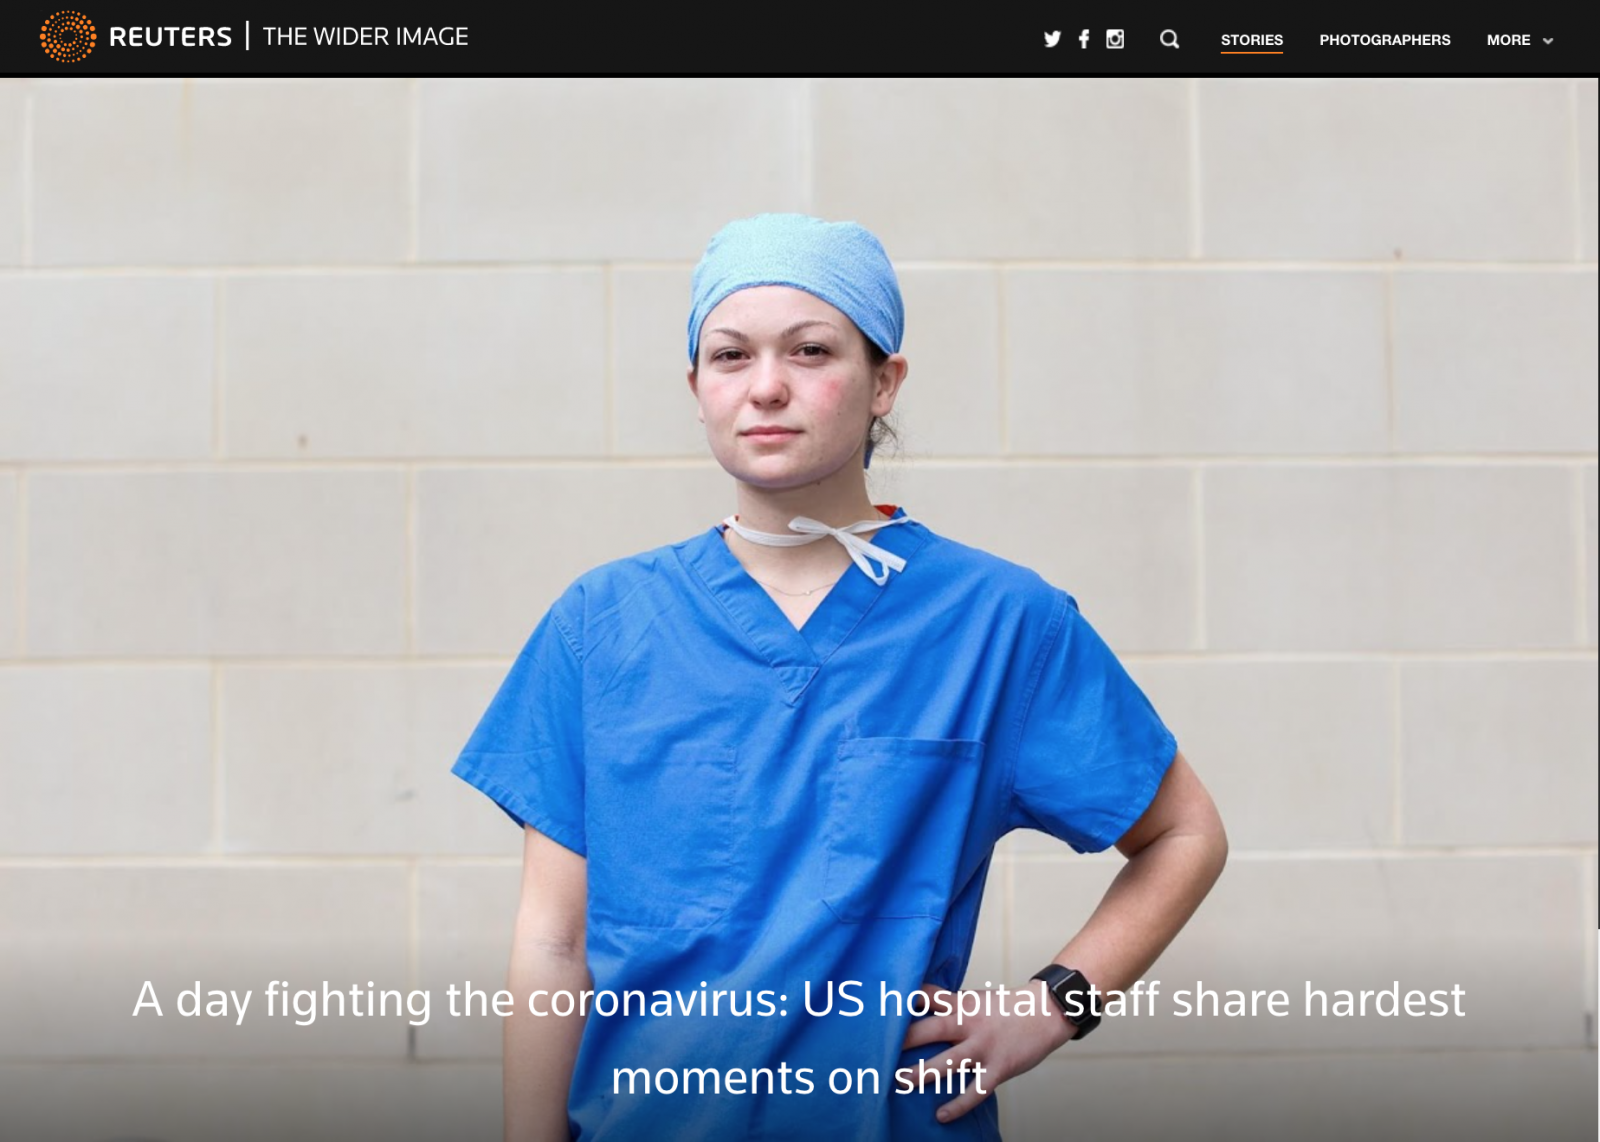 on Reuters: A day fighting the coronavirus: US hospital staff share hardest moments on shift